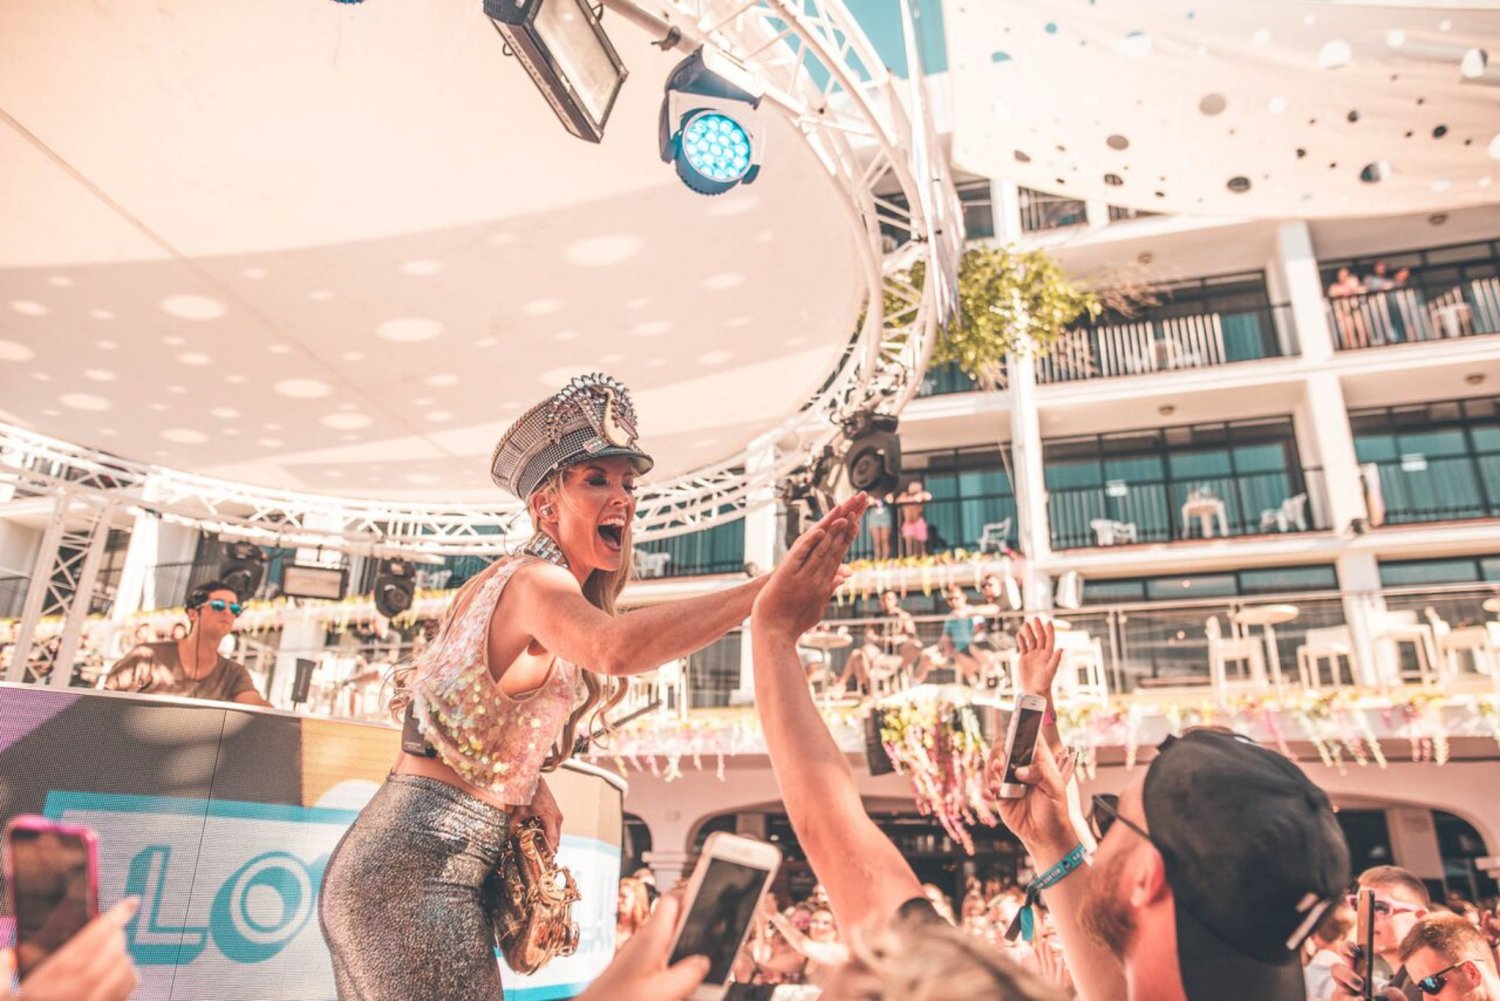 Pool Party: Hard Rock Hotel Ibiza - What Laura Did Next